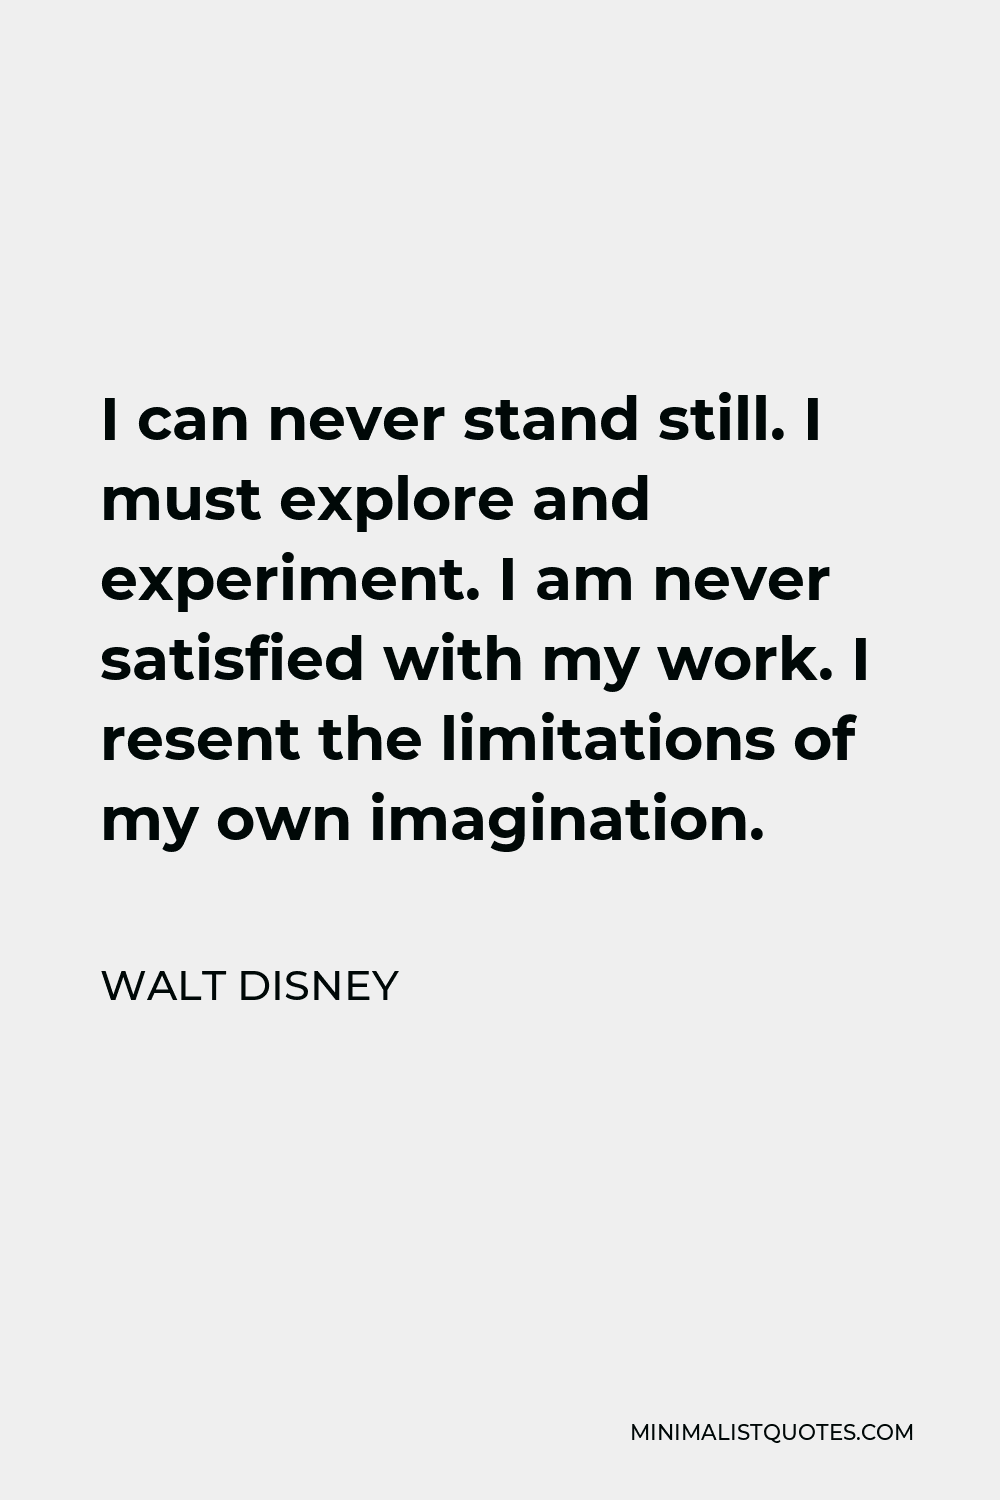 Walt Disney Quote - I can never stand still. I must explore and experiment. I am never satisfied with my work. I resent the limitations of my own imagination.